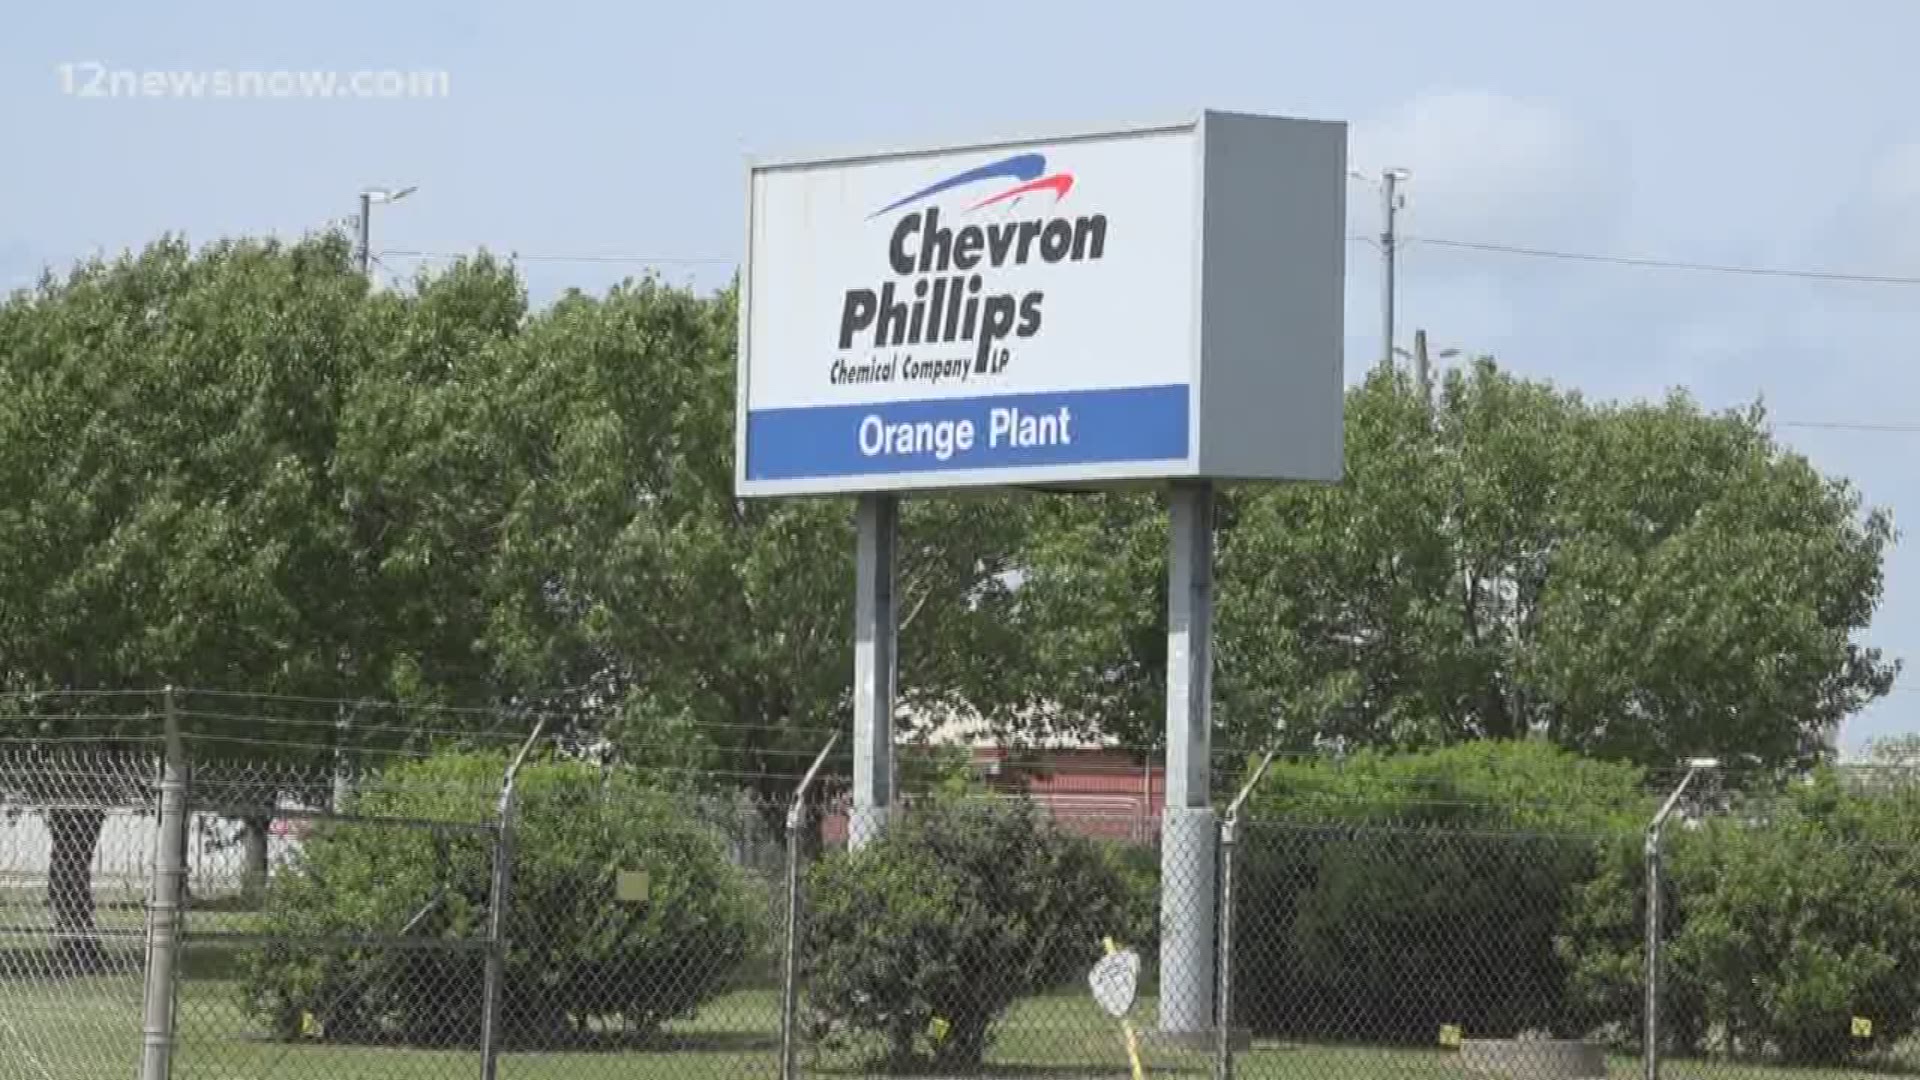 Orange City Council acted at the request of Chevron Phillips. The city is one of the finalists for the next site selection of the new plant. The city said it's doing everything it can to be a contender.